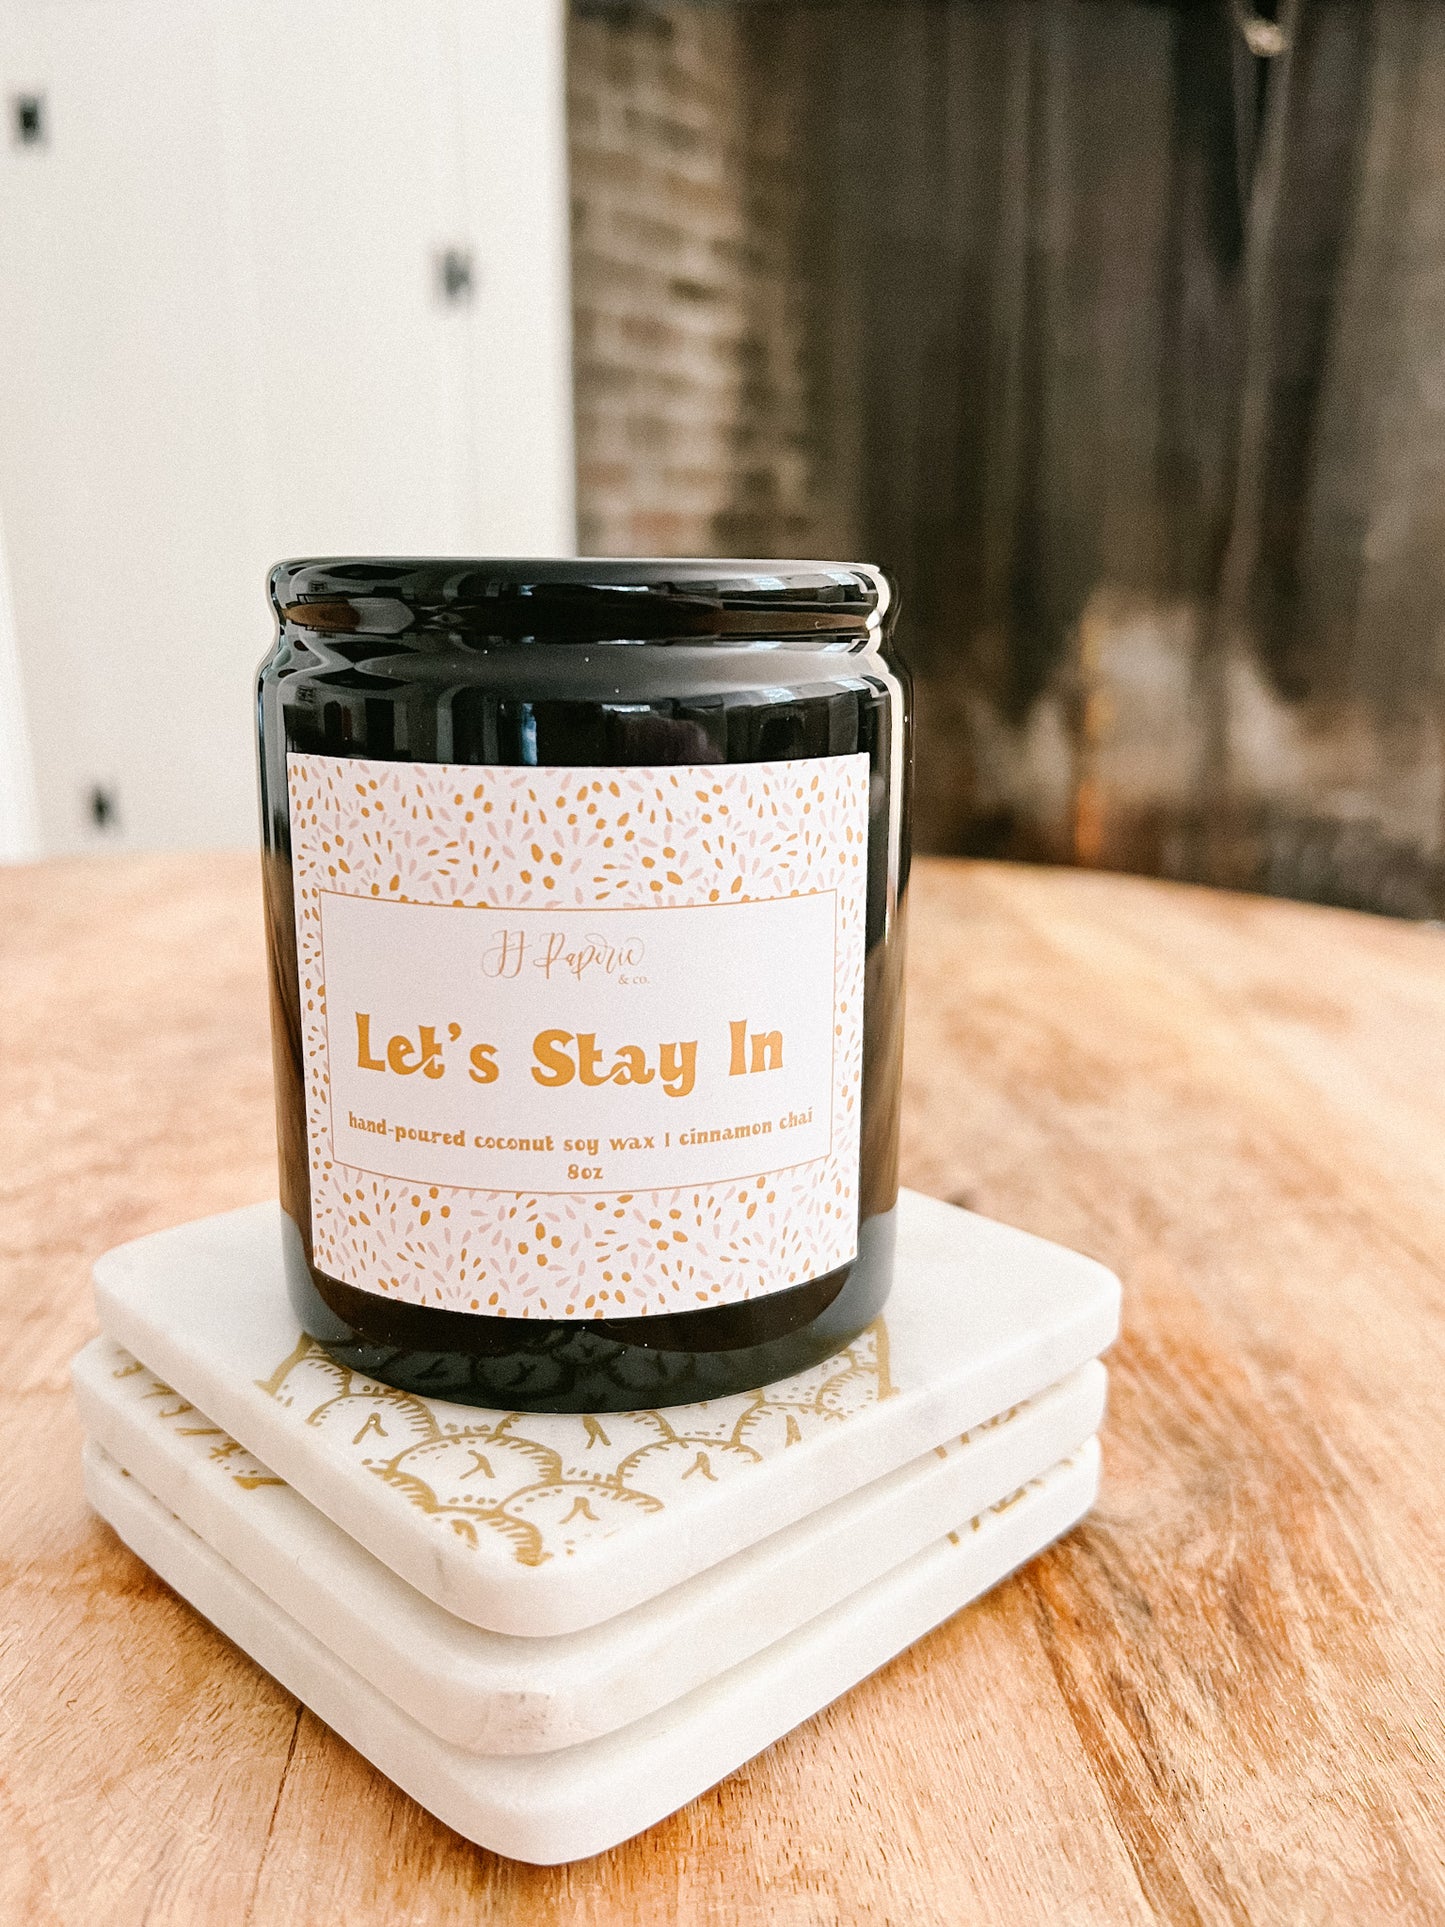 Cinnamon Chai - Let's Stay In Candle - 8oz